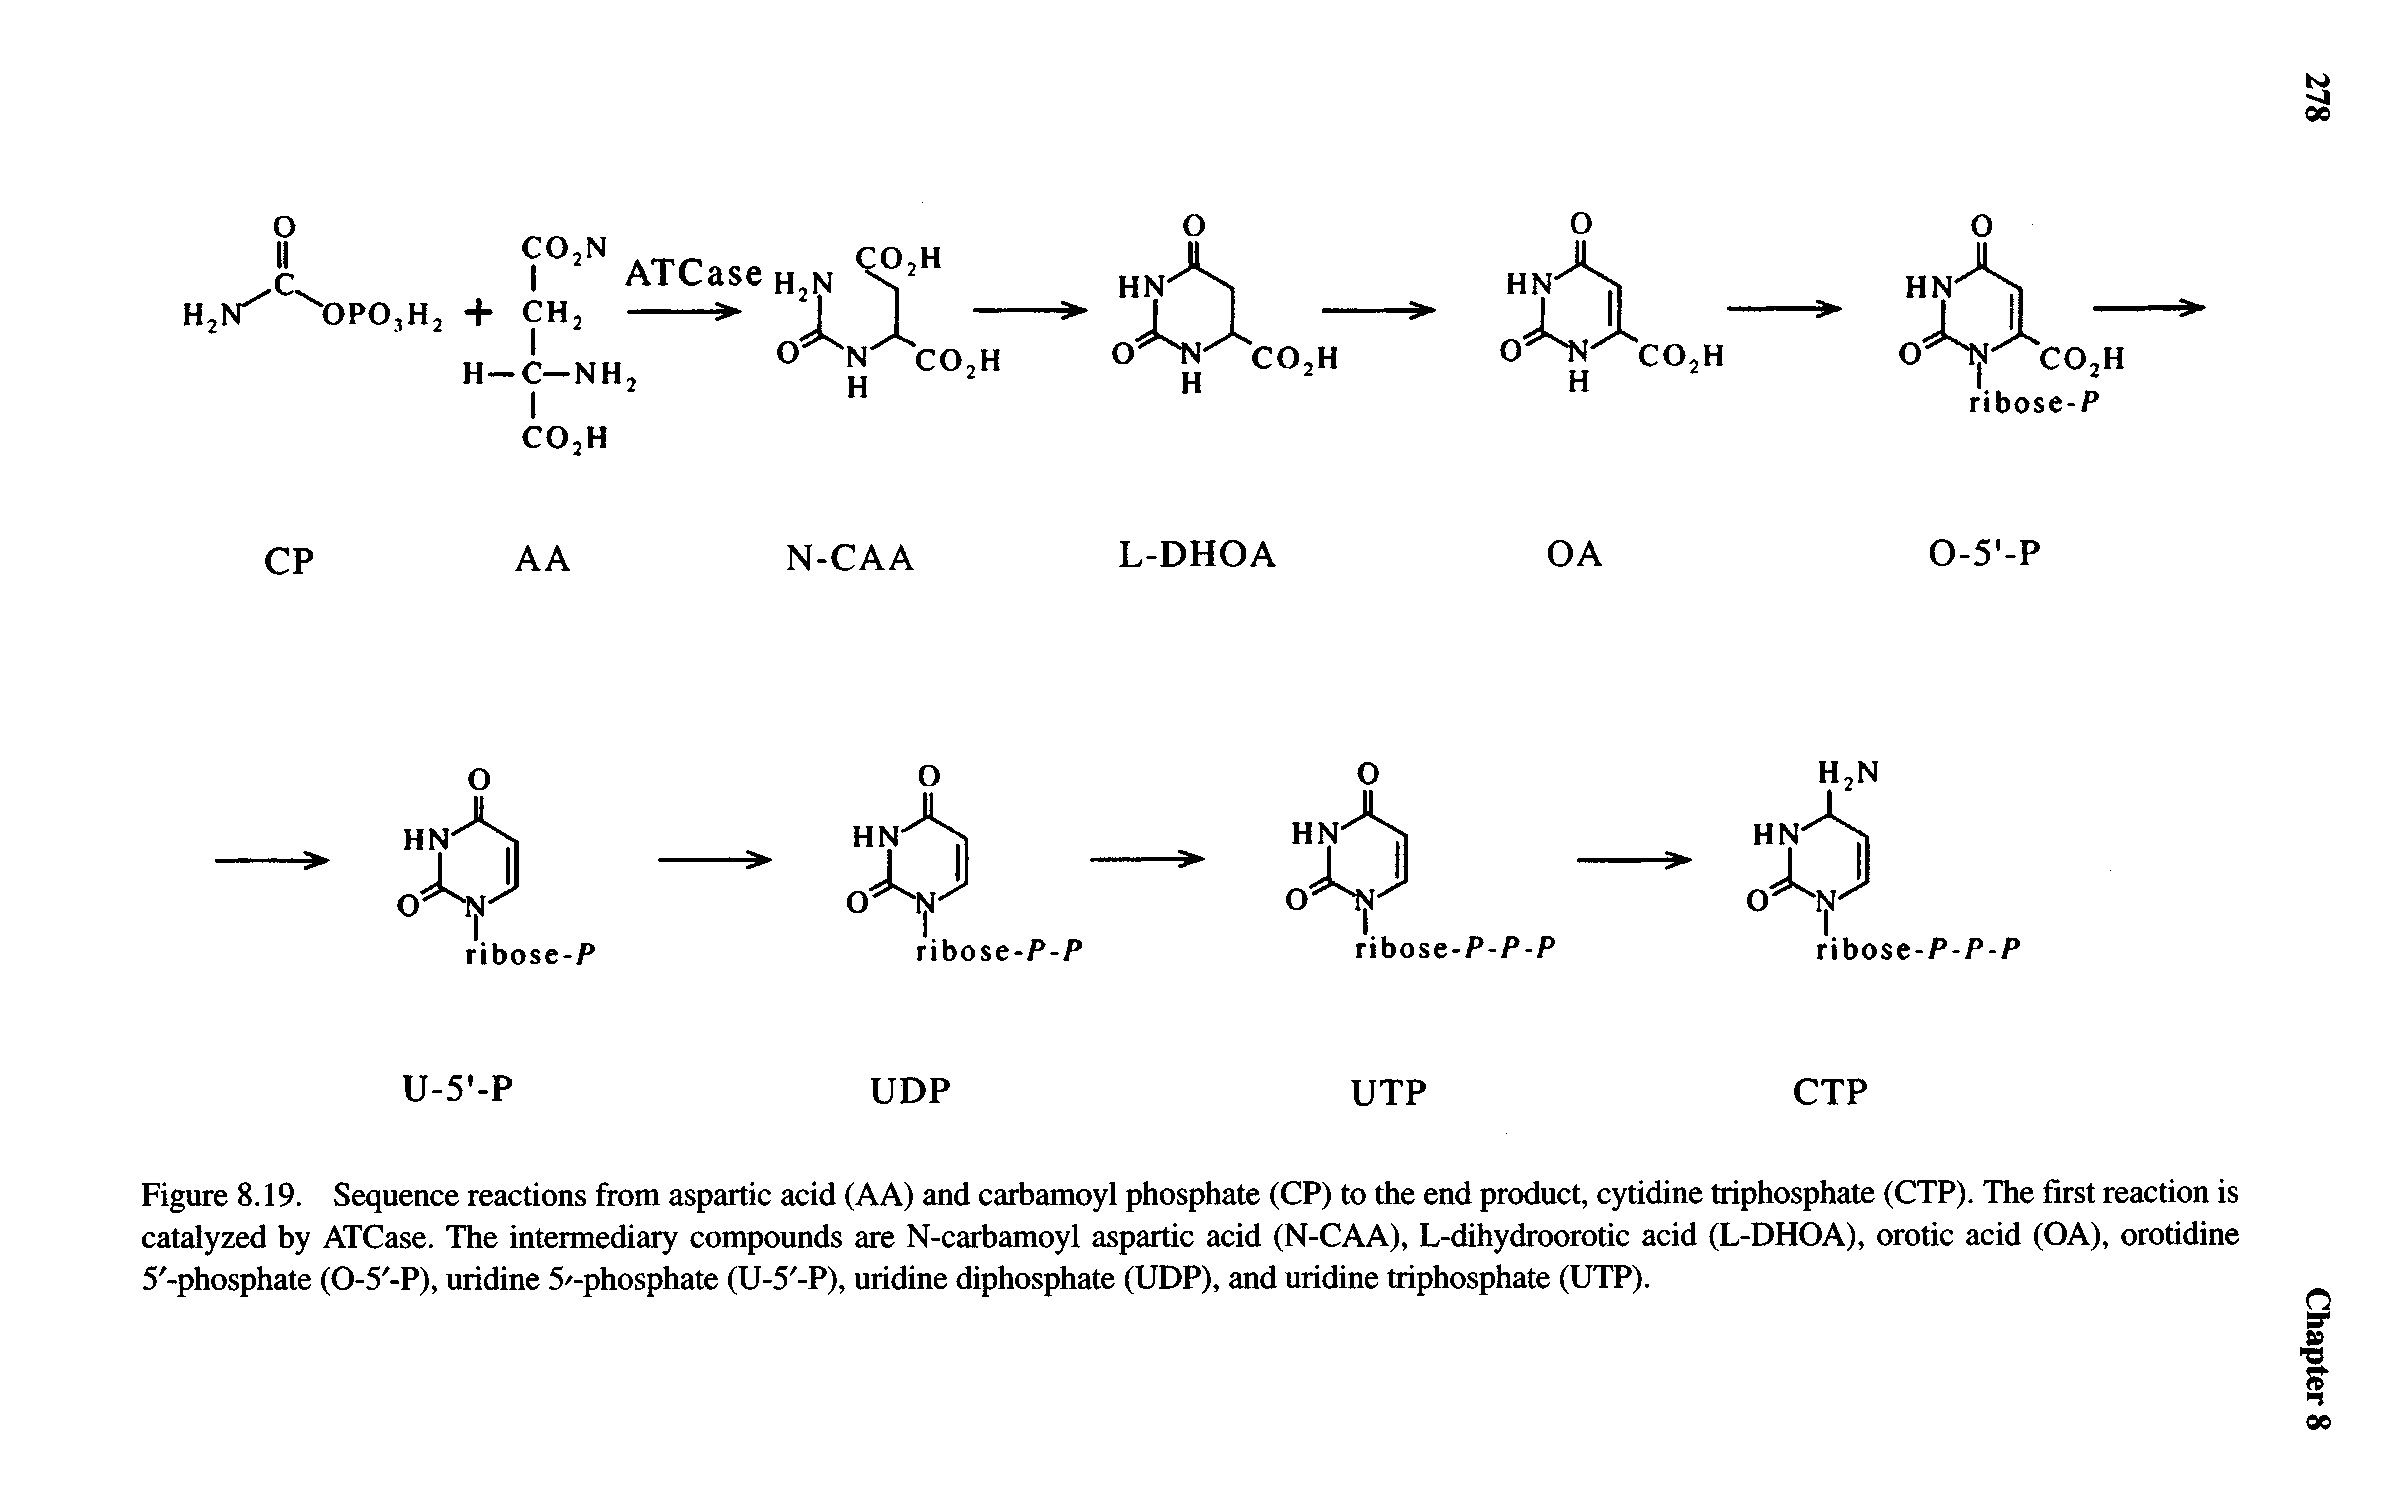 Figure 8.19. Sequence reactions from aspartic acid (AA) and carbamoyl phosphate (CP) to the end product, cytidine triphosphate (CTP). The first reaction is catalyzed by ATCase. The intermediary compounds are N-carbamoyl aspartic acid (N-CAA), L-dihydroorotic acid (L-DHOA), orotic acid (OA), orotidine 5 -phosphate (0-5 -P), uridine 5 -phosphate (U-5 -P), uridine diphosphate (UDP), and uridine triphosphate (UTP).